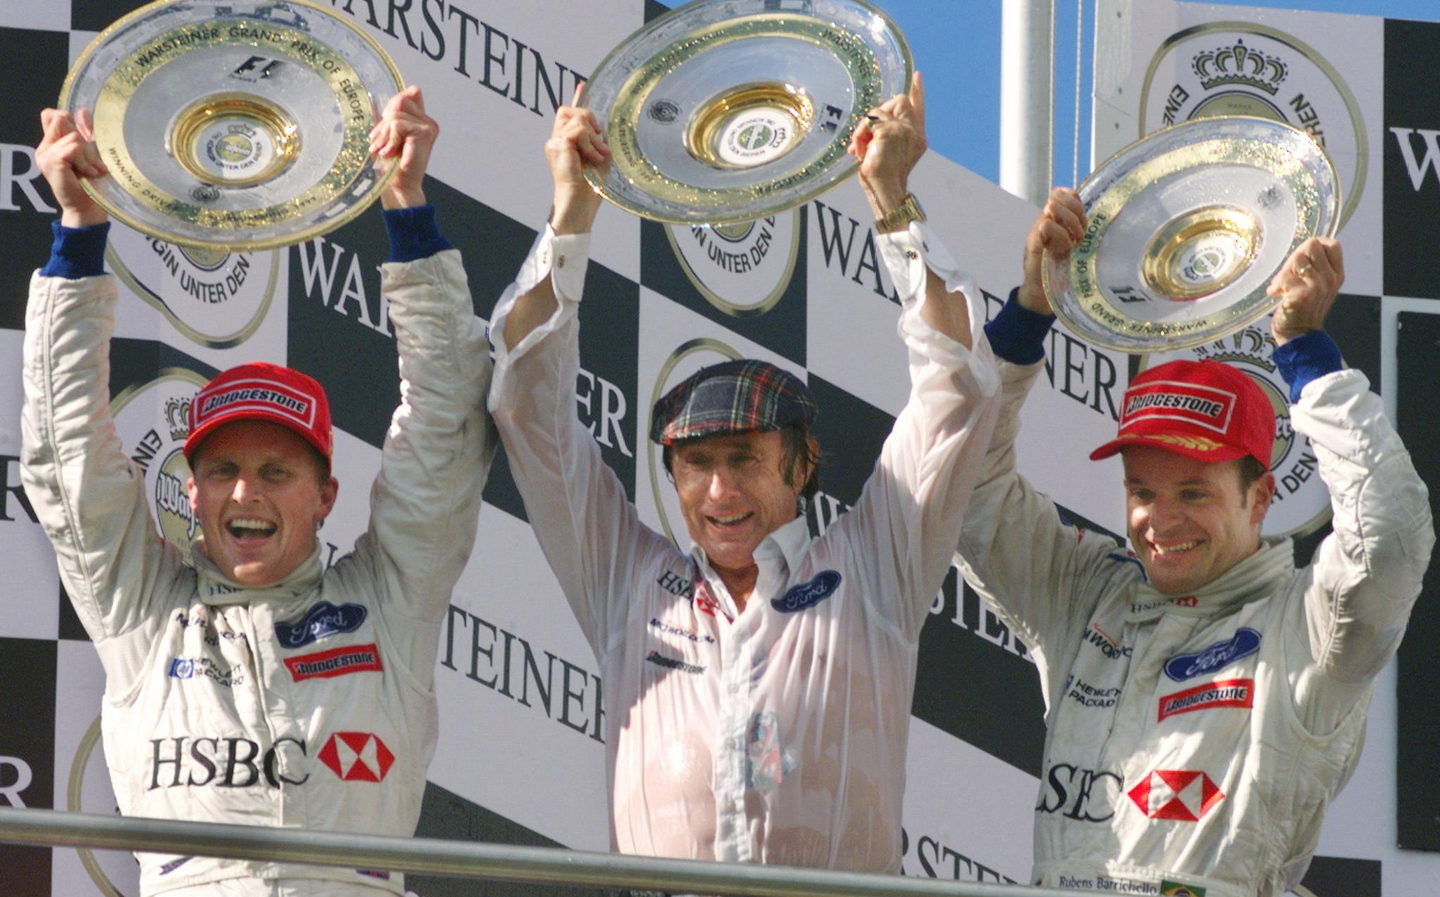 Ford in F1 - Stewart on the podium in 1999